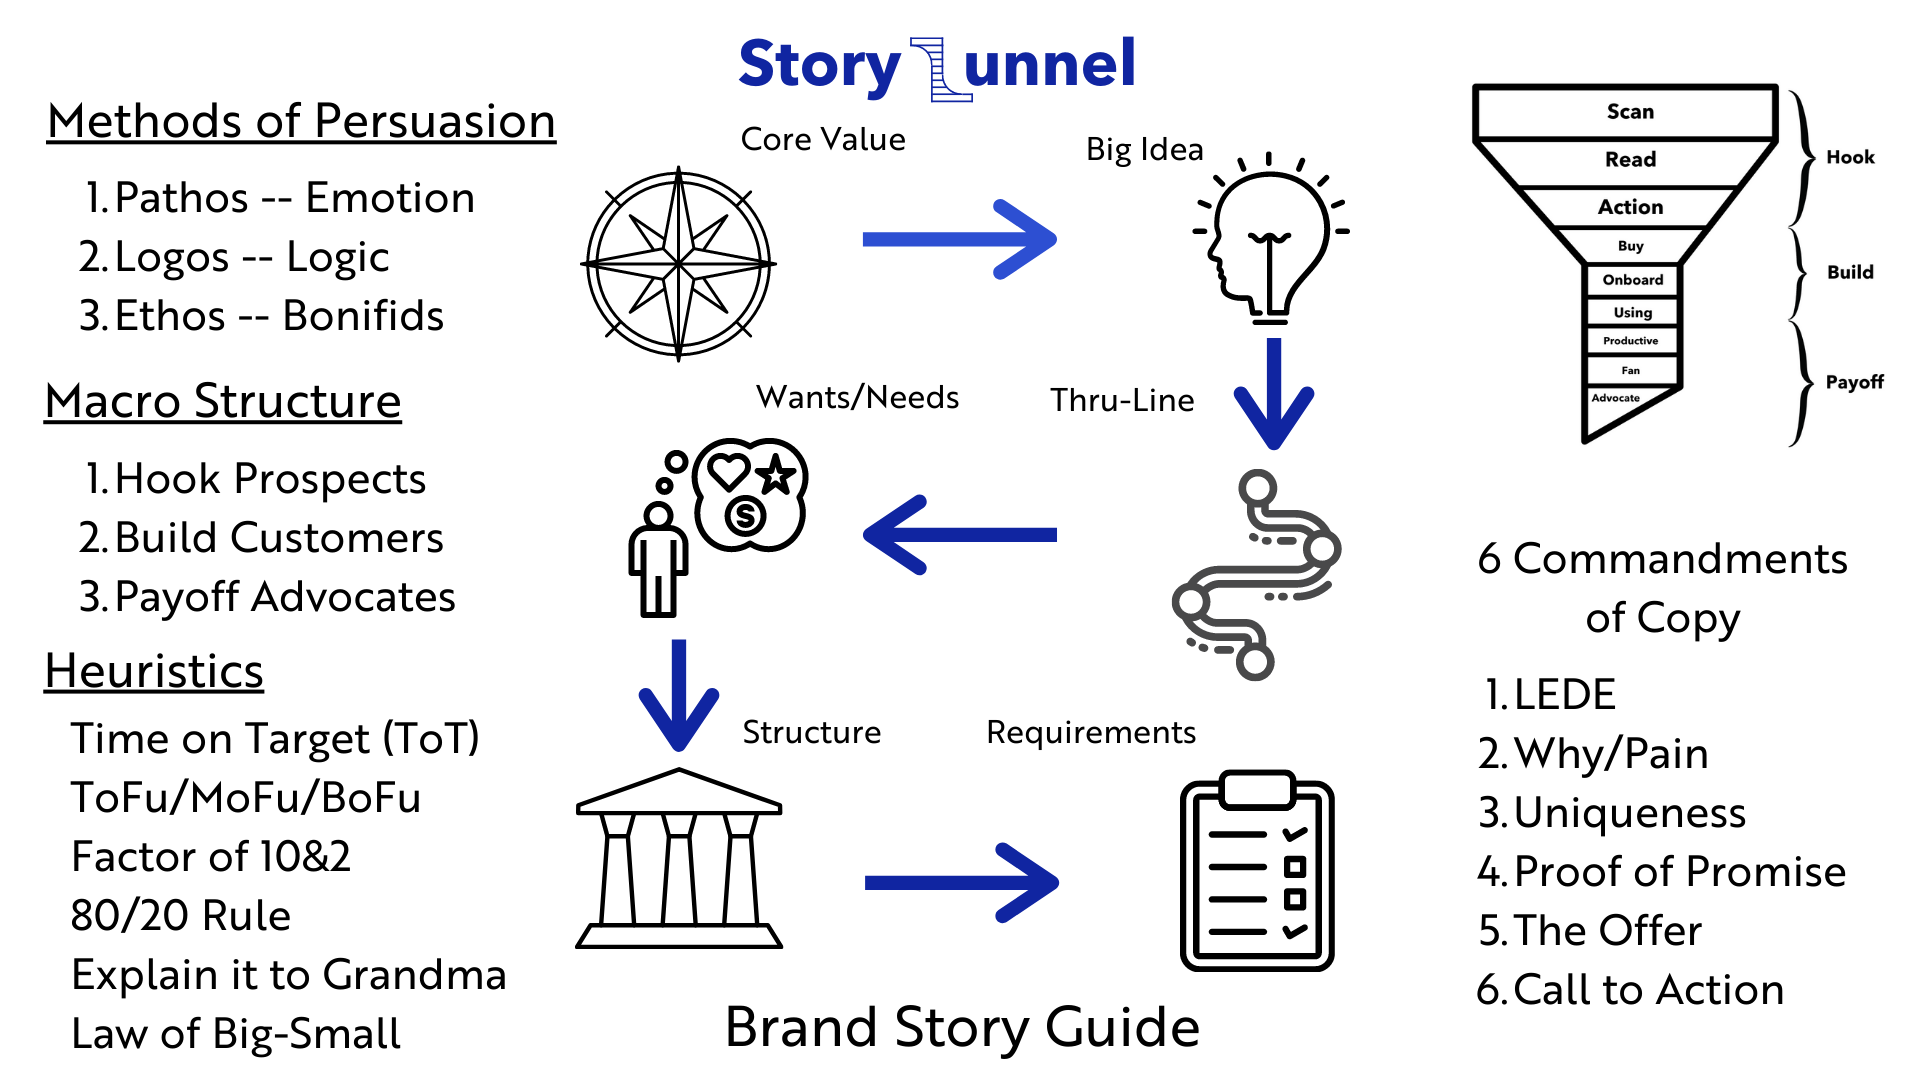 Introducing The Story Funnel Workshop